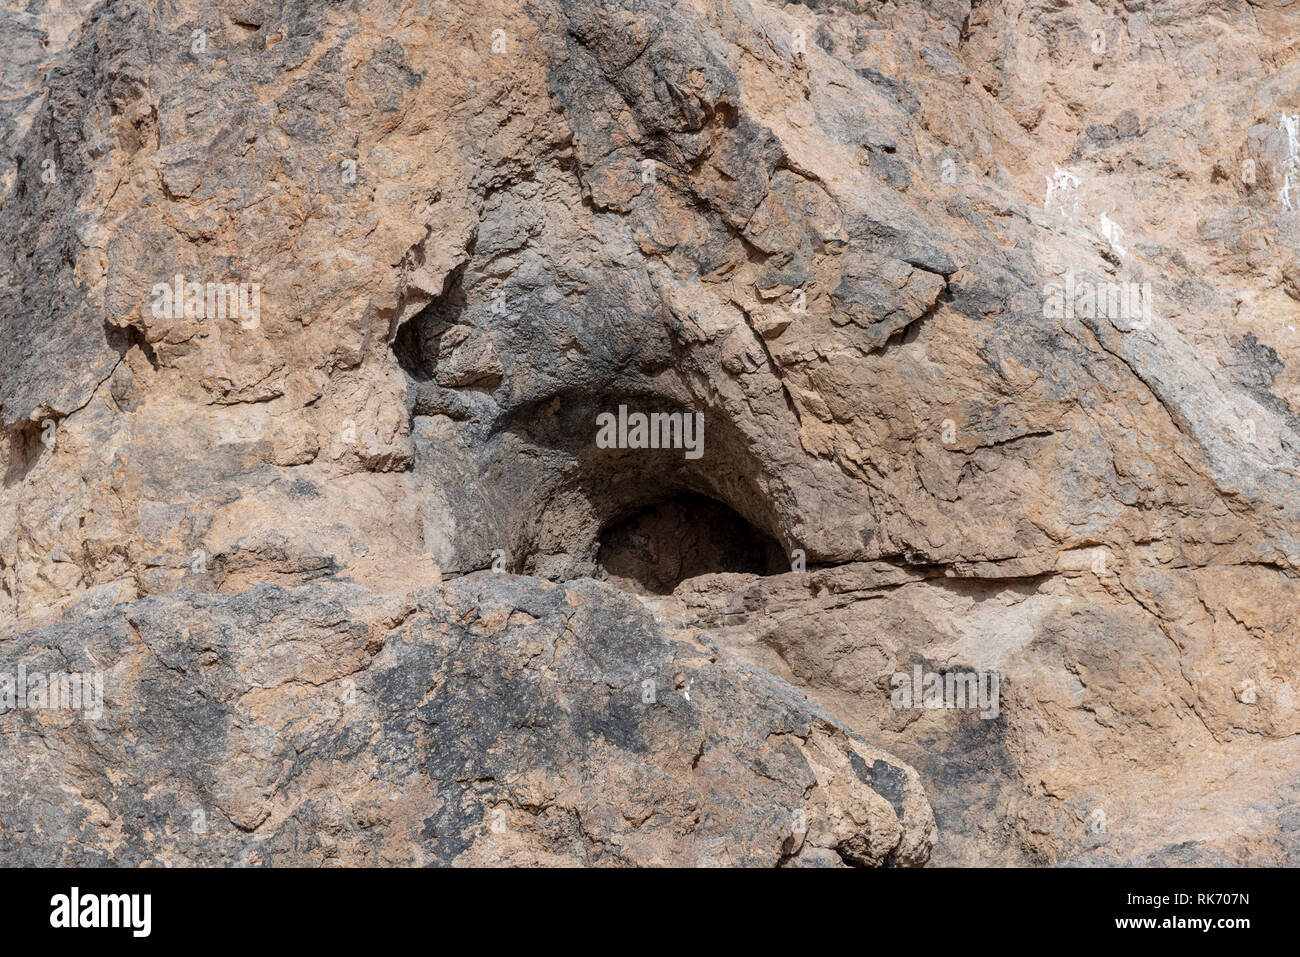 [Image: rocky-mountainside-with-small-cave-RK707N.jpg]